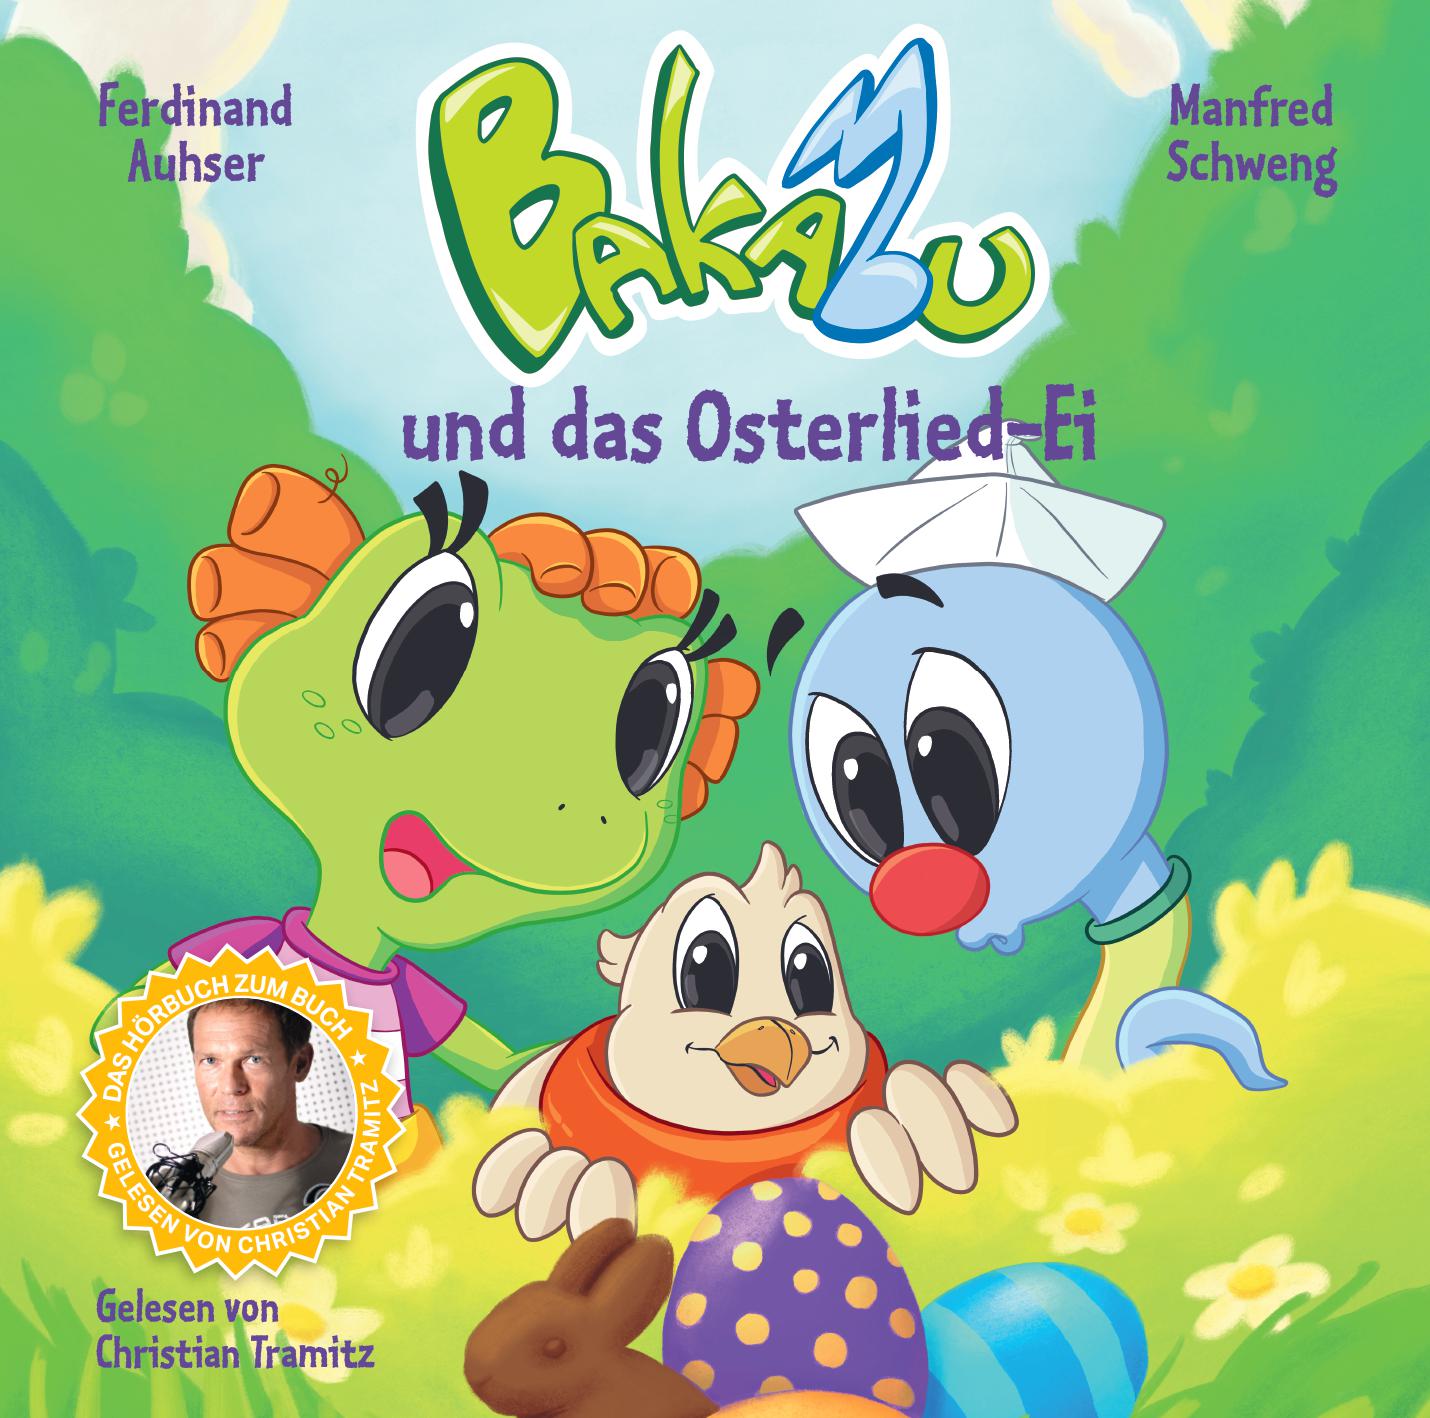 CD Cover with Bakabu and his friends in a green field